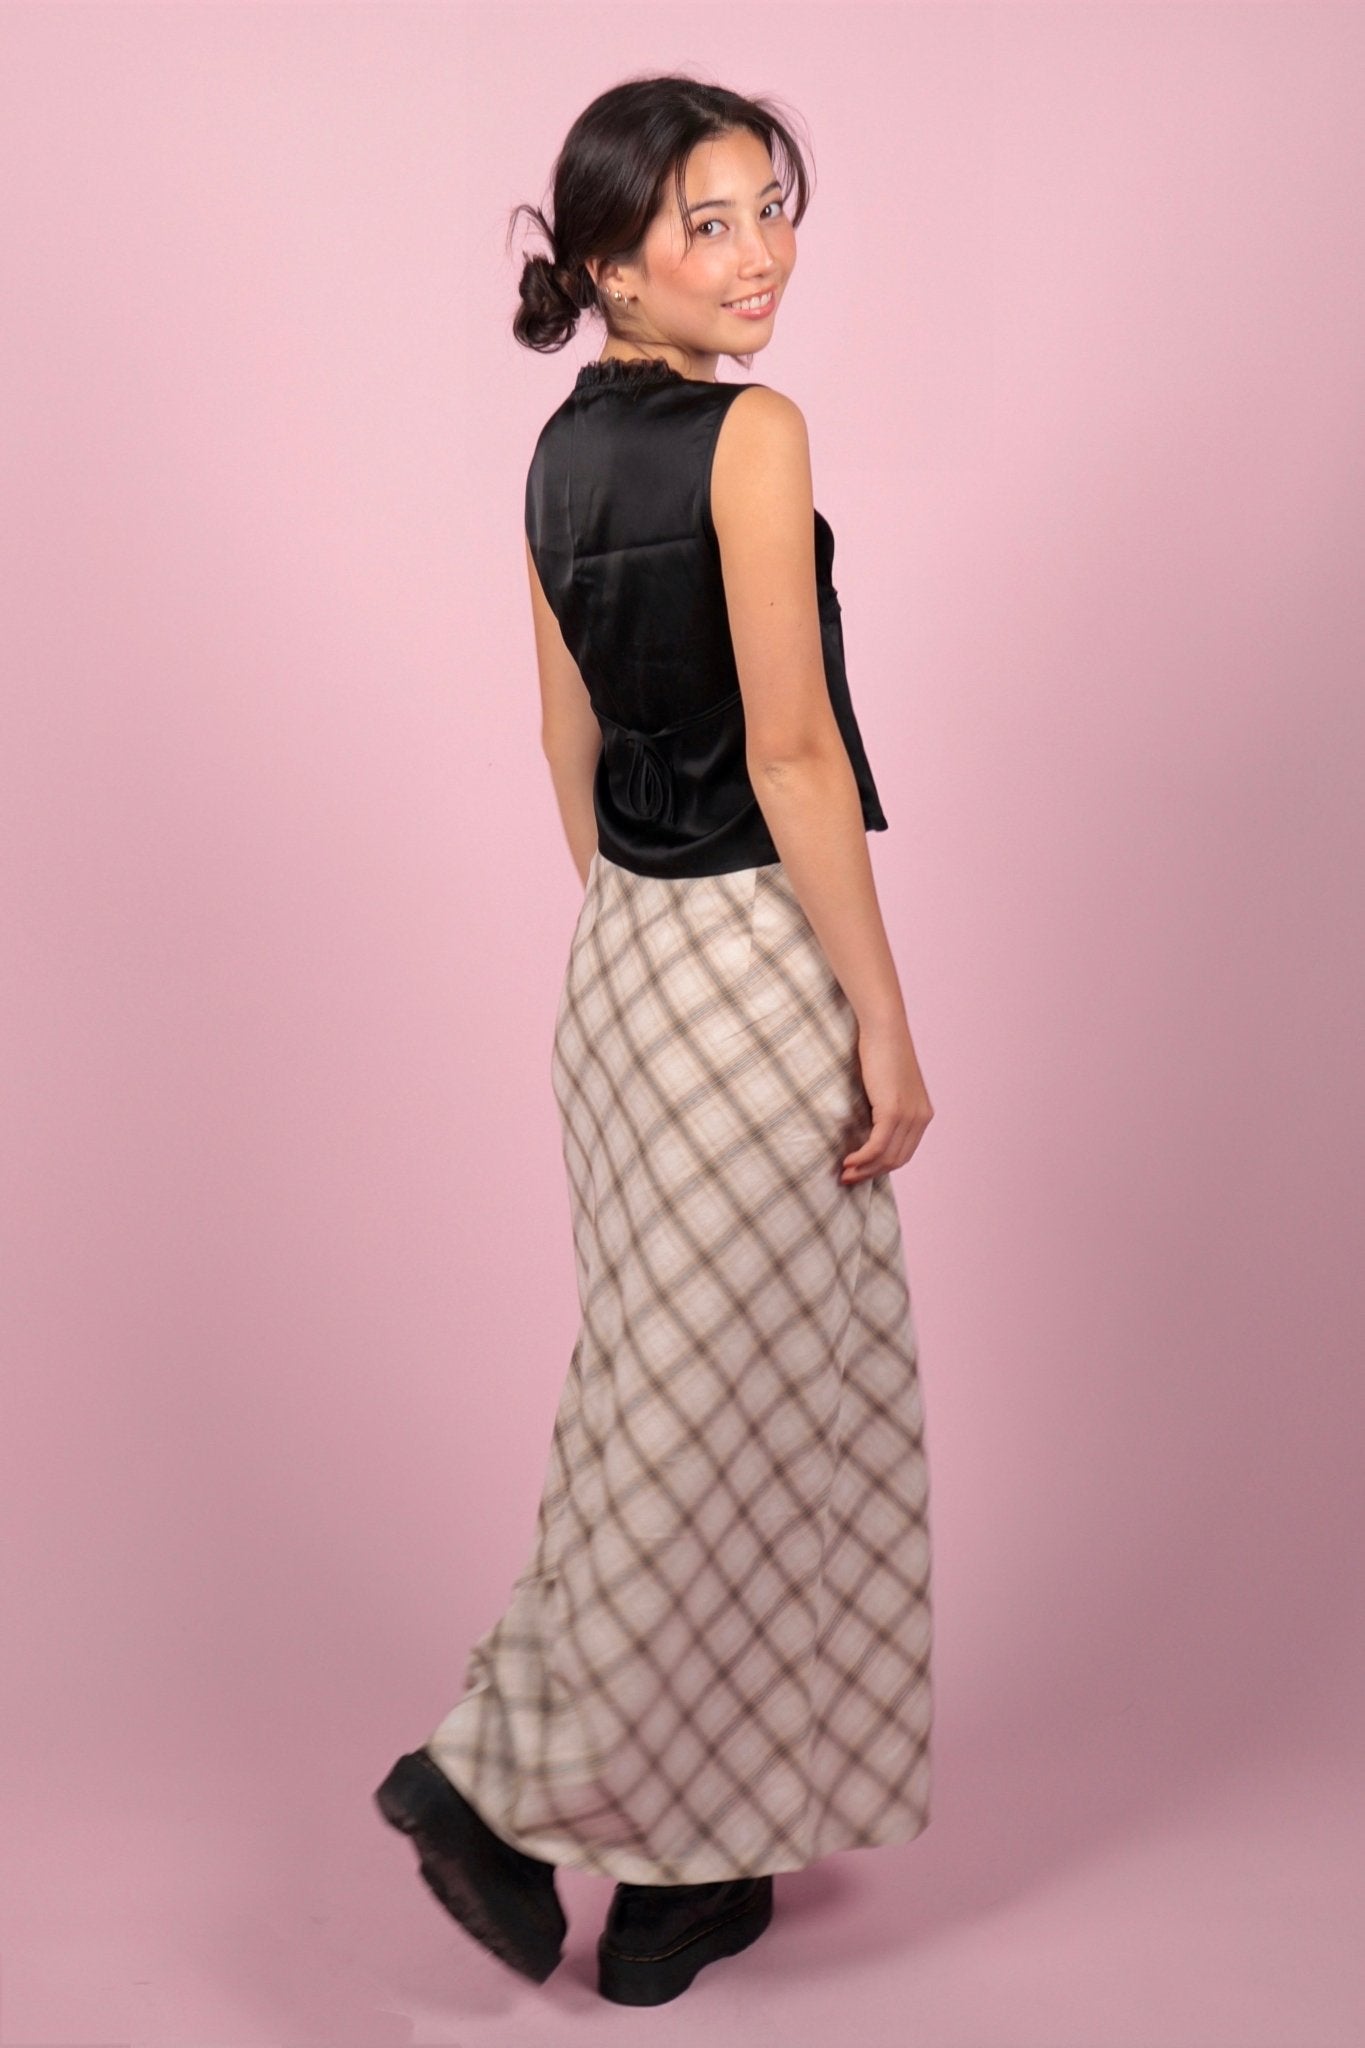 SCG MADE |Kelsey 90s plaid maxi skirt - SCG_COLLECTIONSBottom